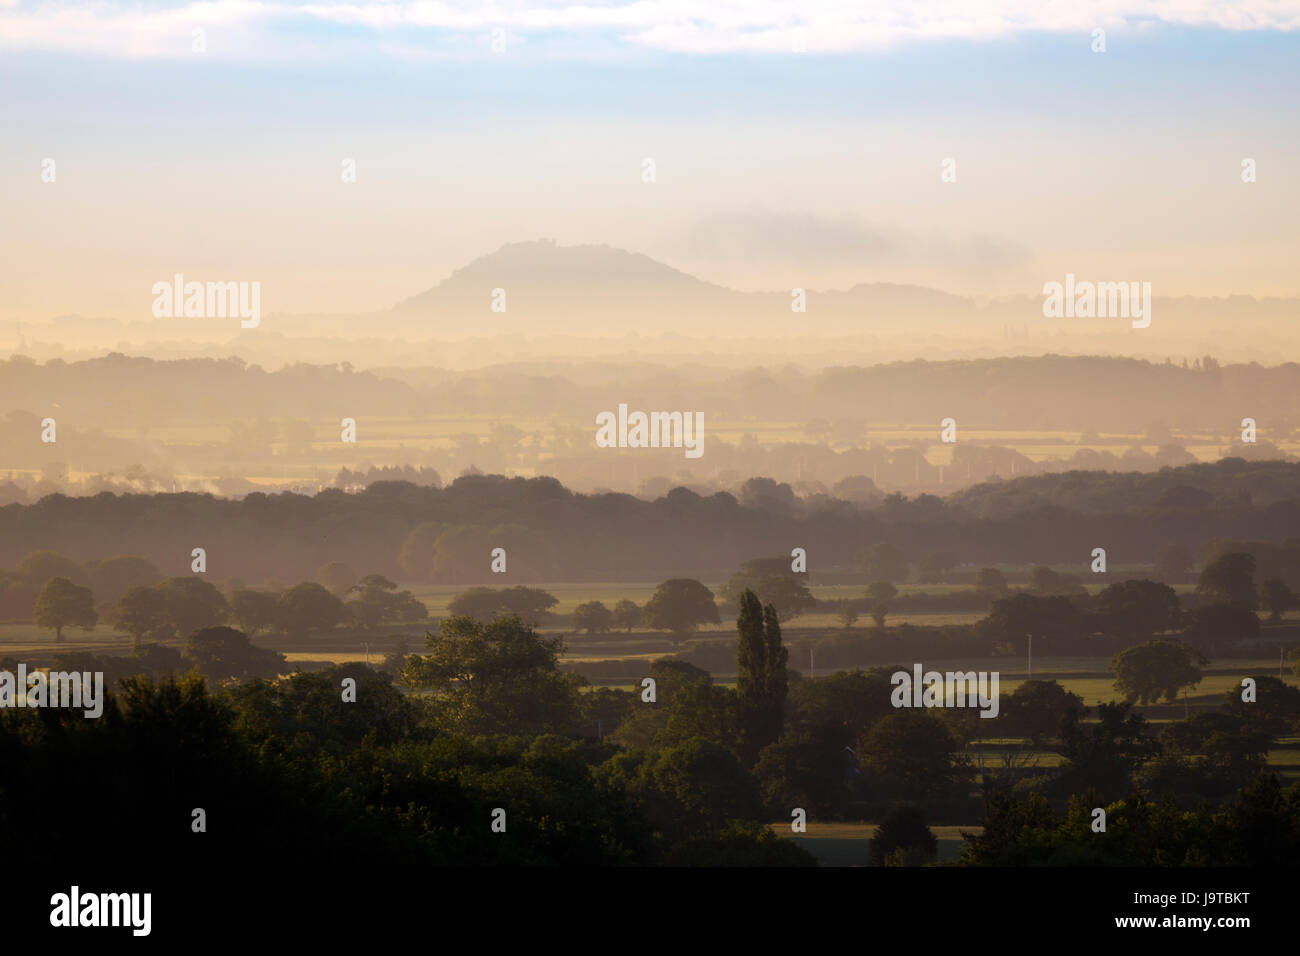 A misty rural landscape in summer across the Cheshire Plain towards Beeston Castle on the prominet hill overlooking the landscape, Cheshire, England, UK Stock Photo